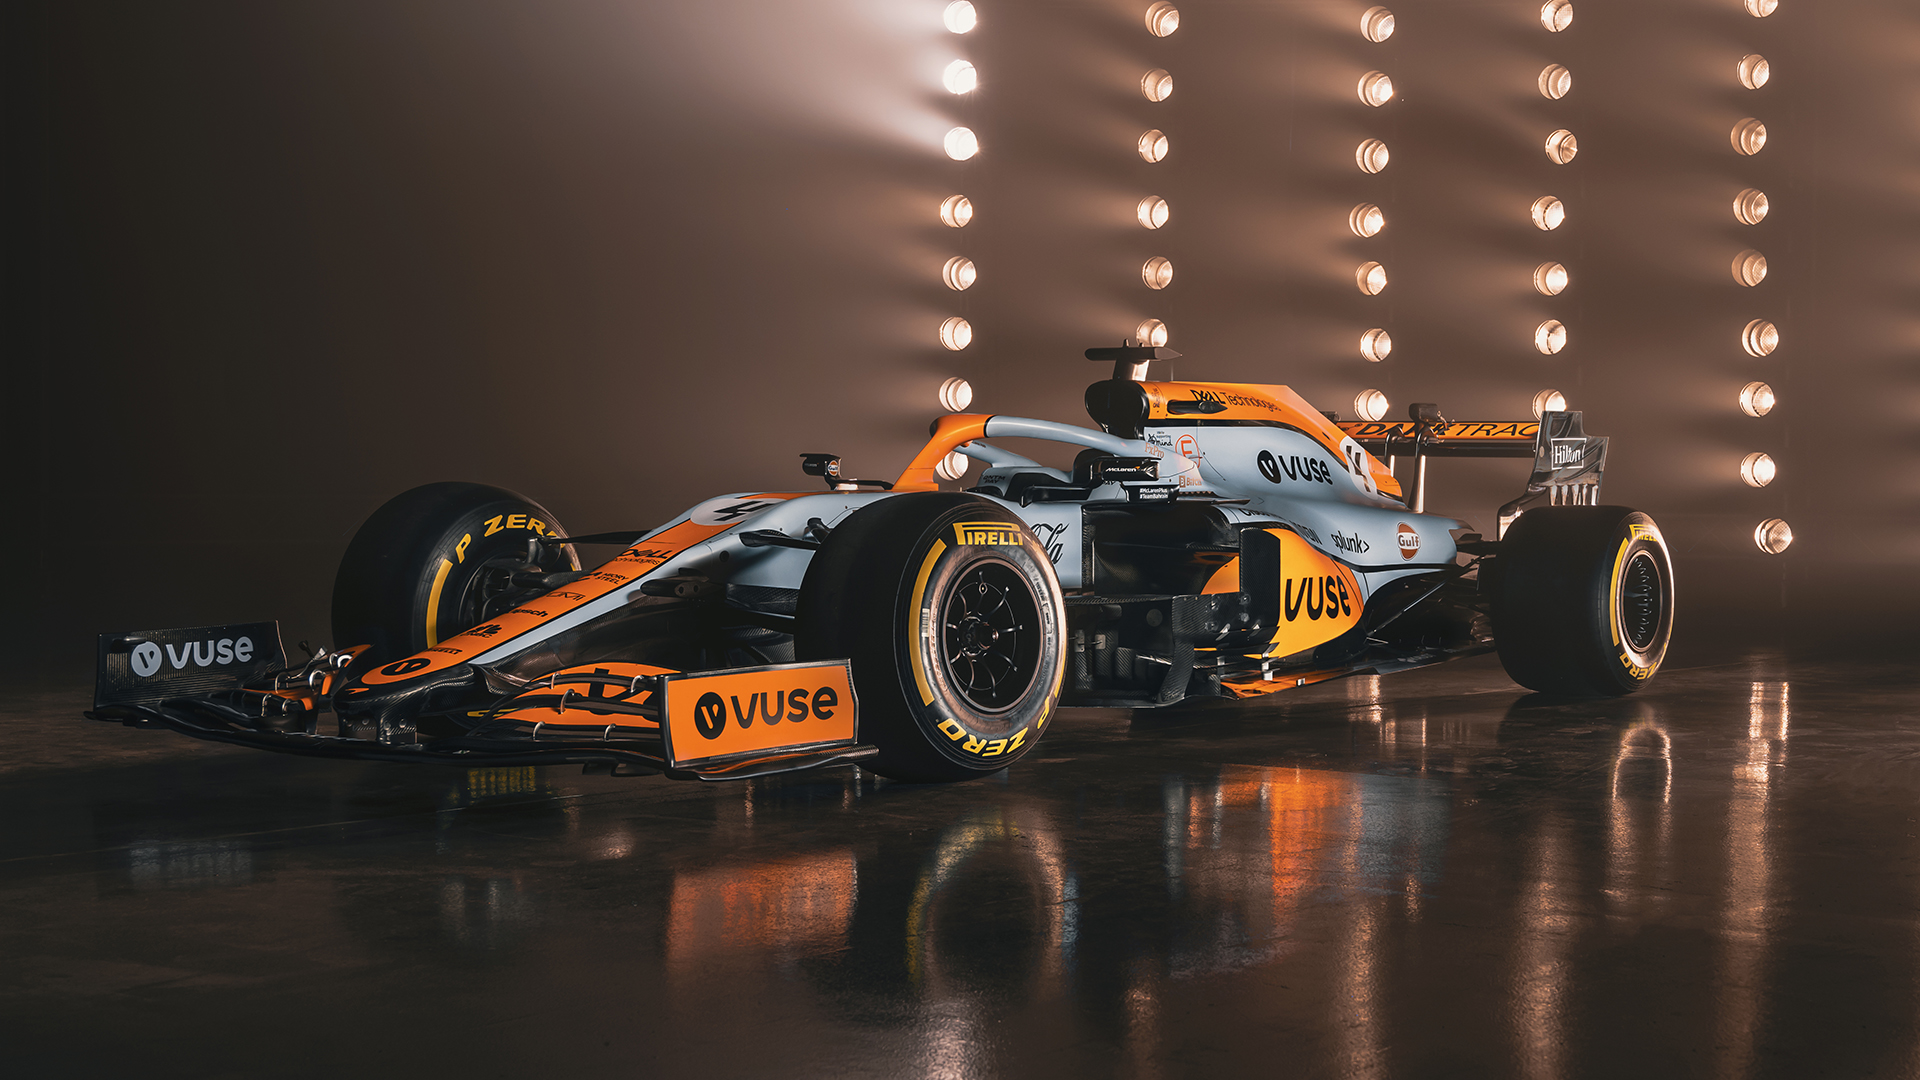 Free download McLarens stunning retro Gulf Oil livery appears for first